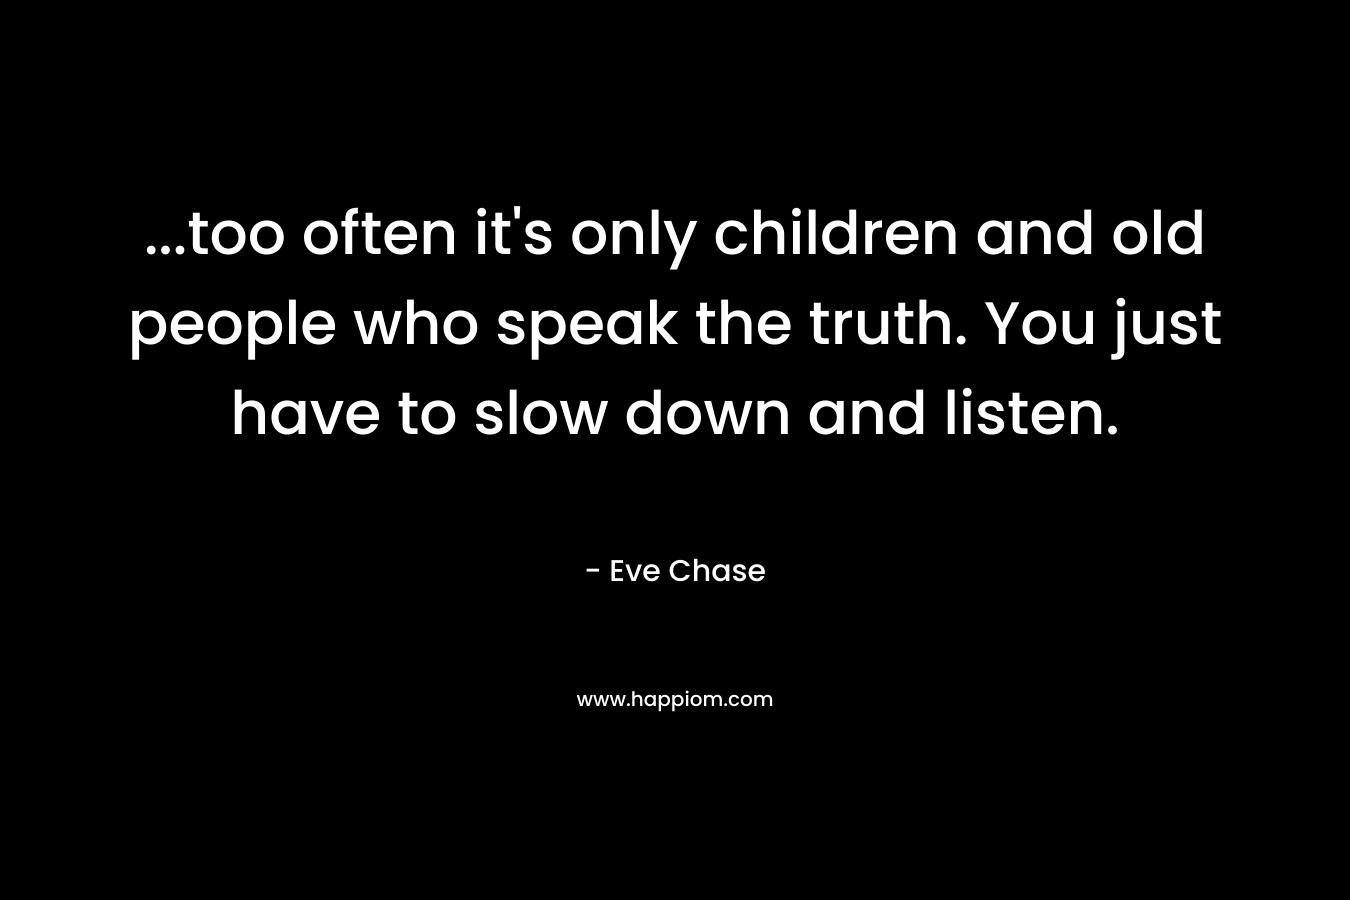 …too often it’s only children and old people who speak the truth. You just have to slow down and listen. – Eve Chase